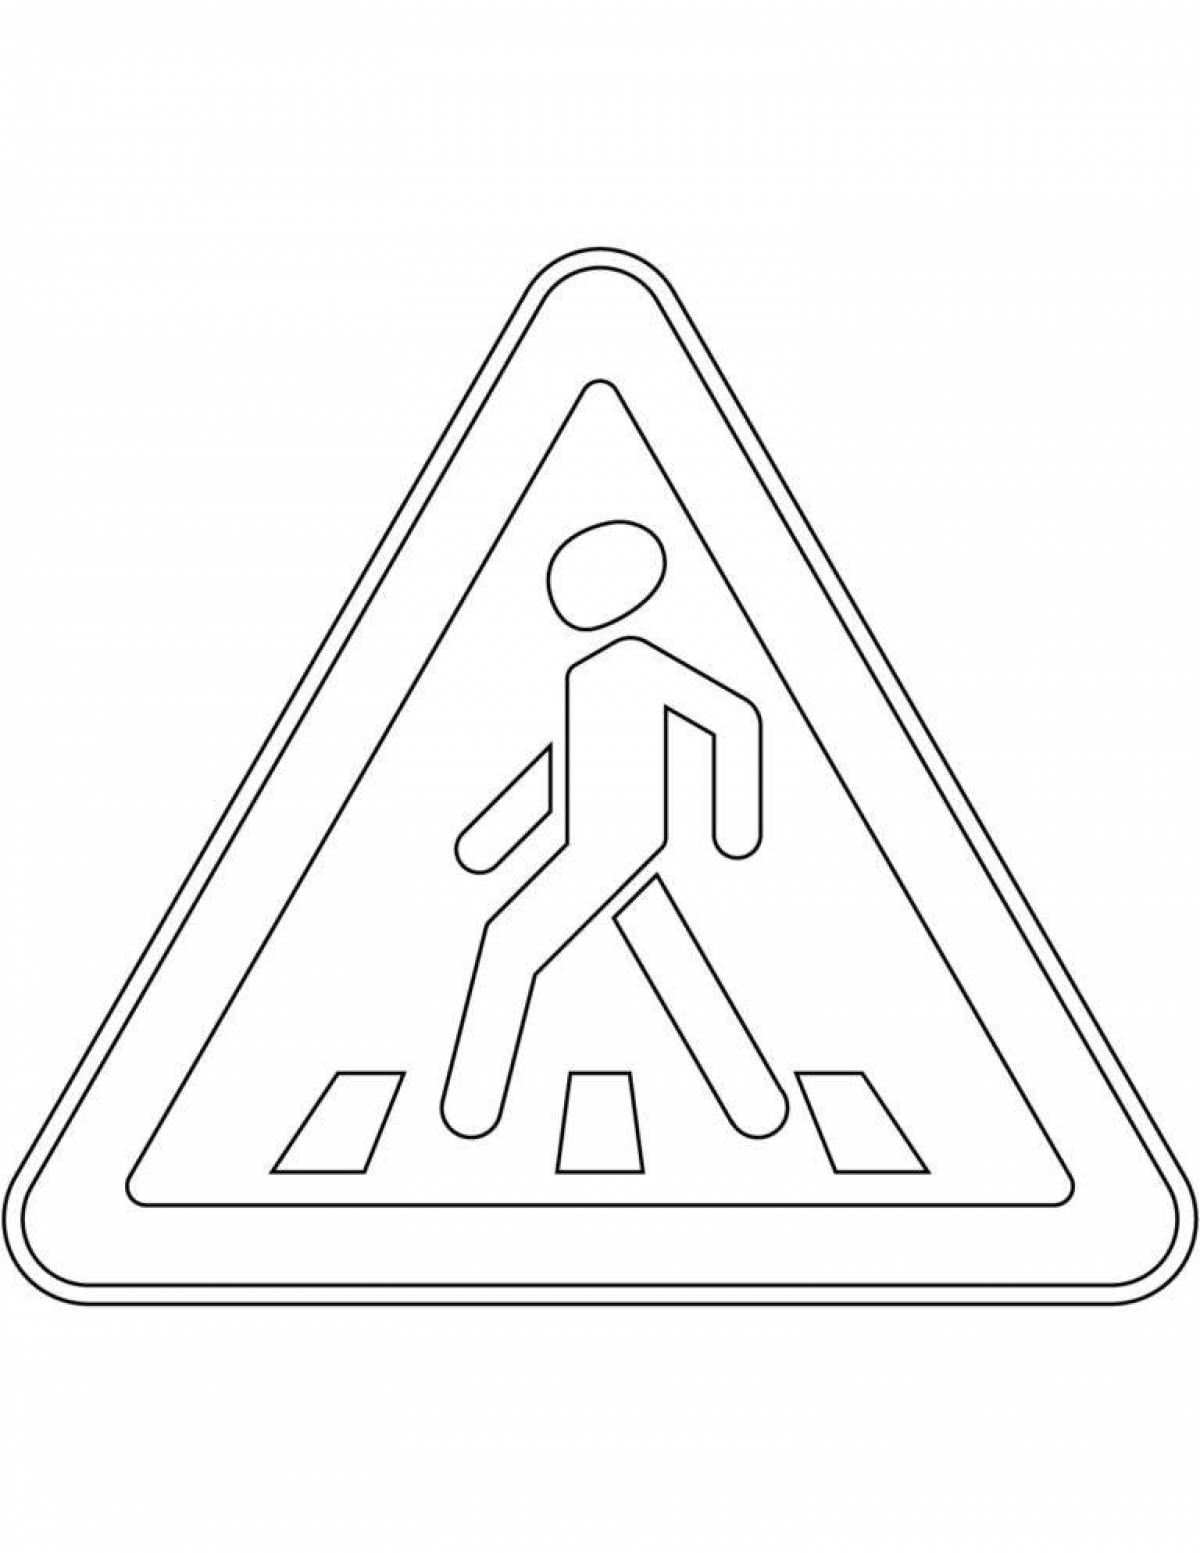 Coloring page stimulating traffic signs